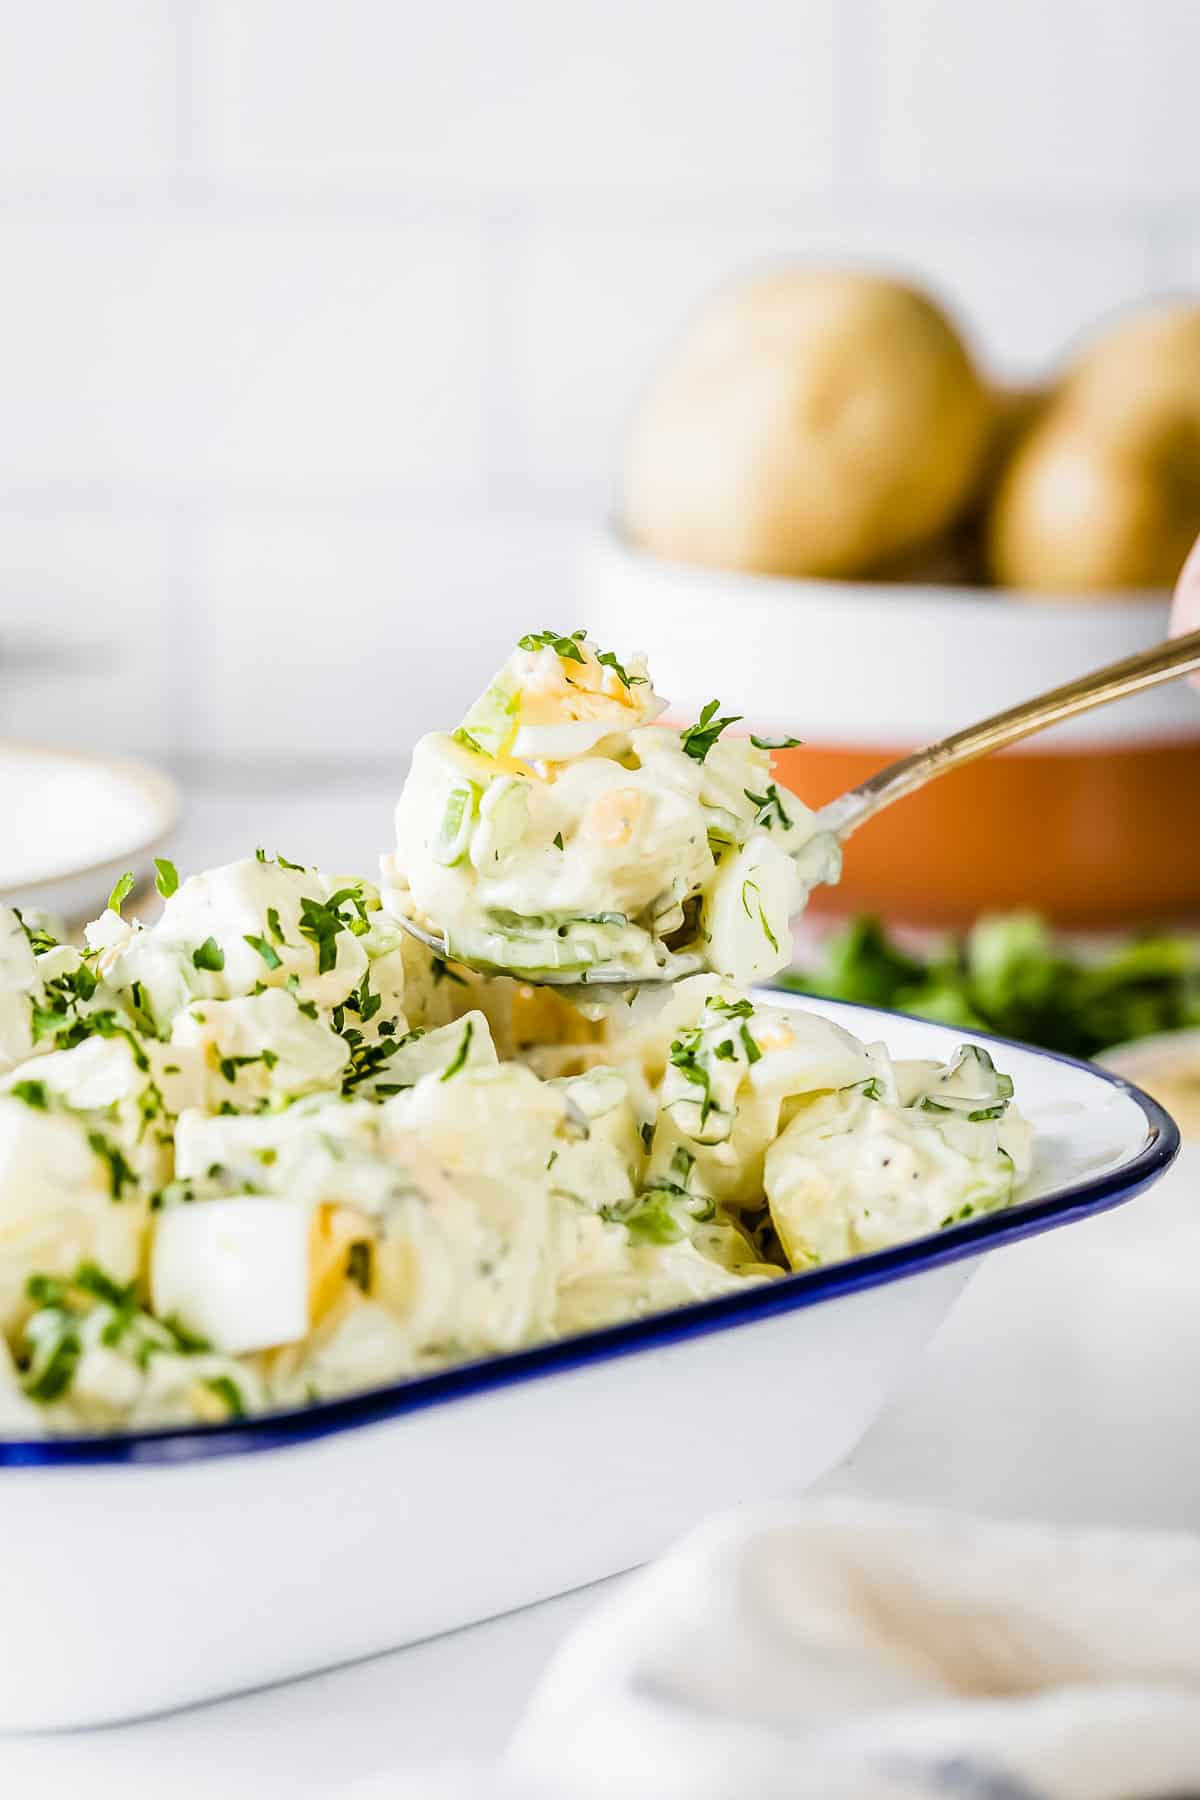 Spoonful of potato salad being lifted from the baking dish with the rest of the potato salad.